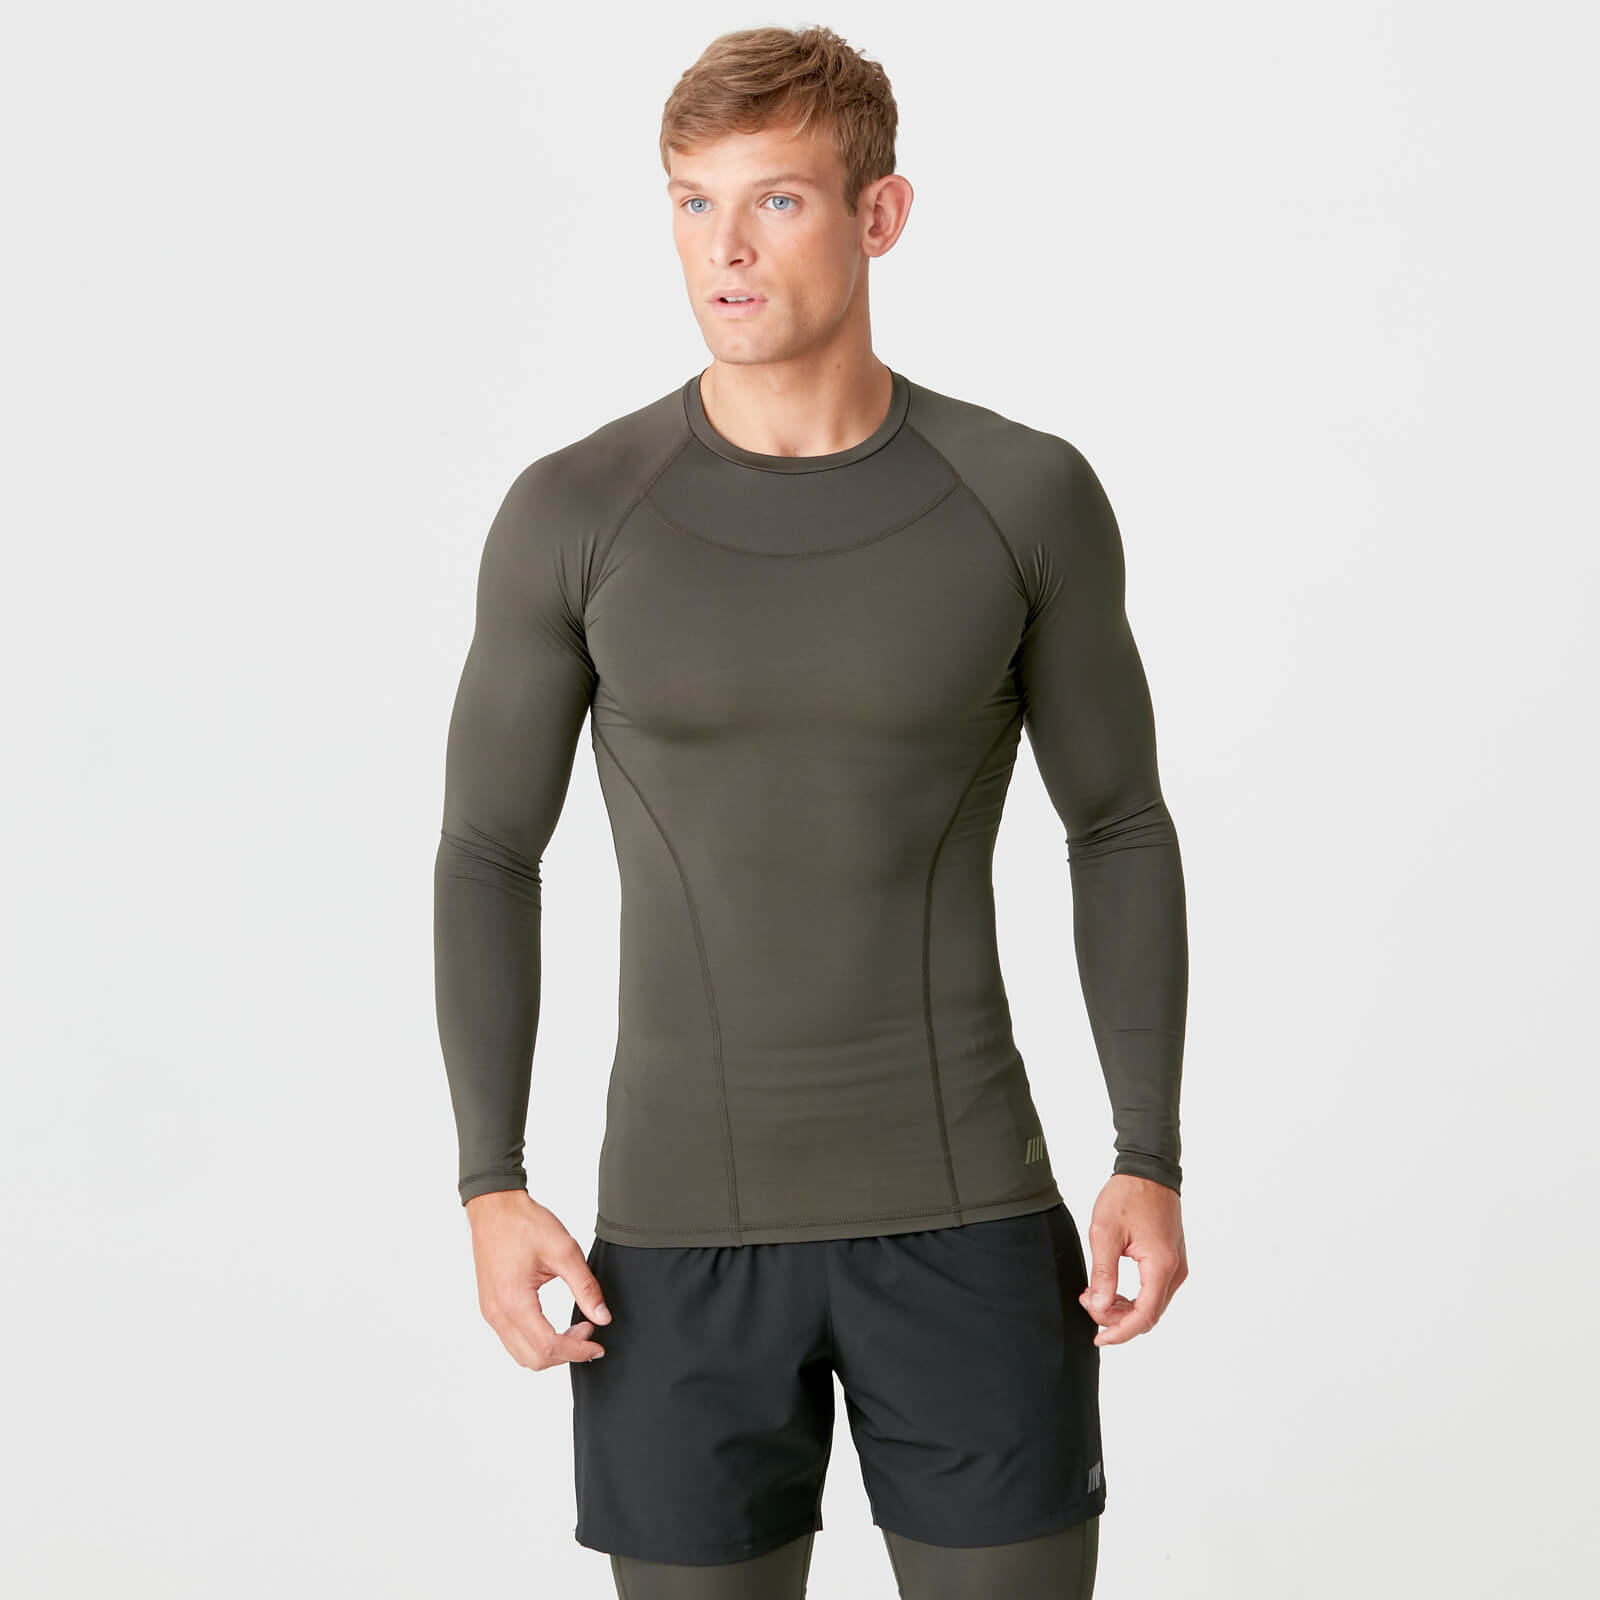 Myprotein Charge Compression Long Sleeve Top - Dark Khaki - L